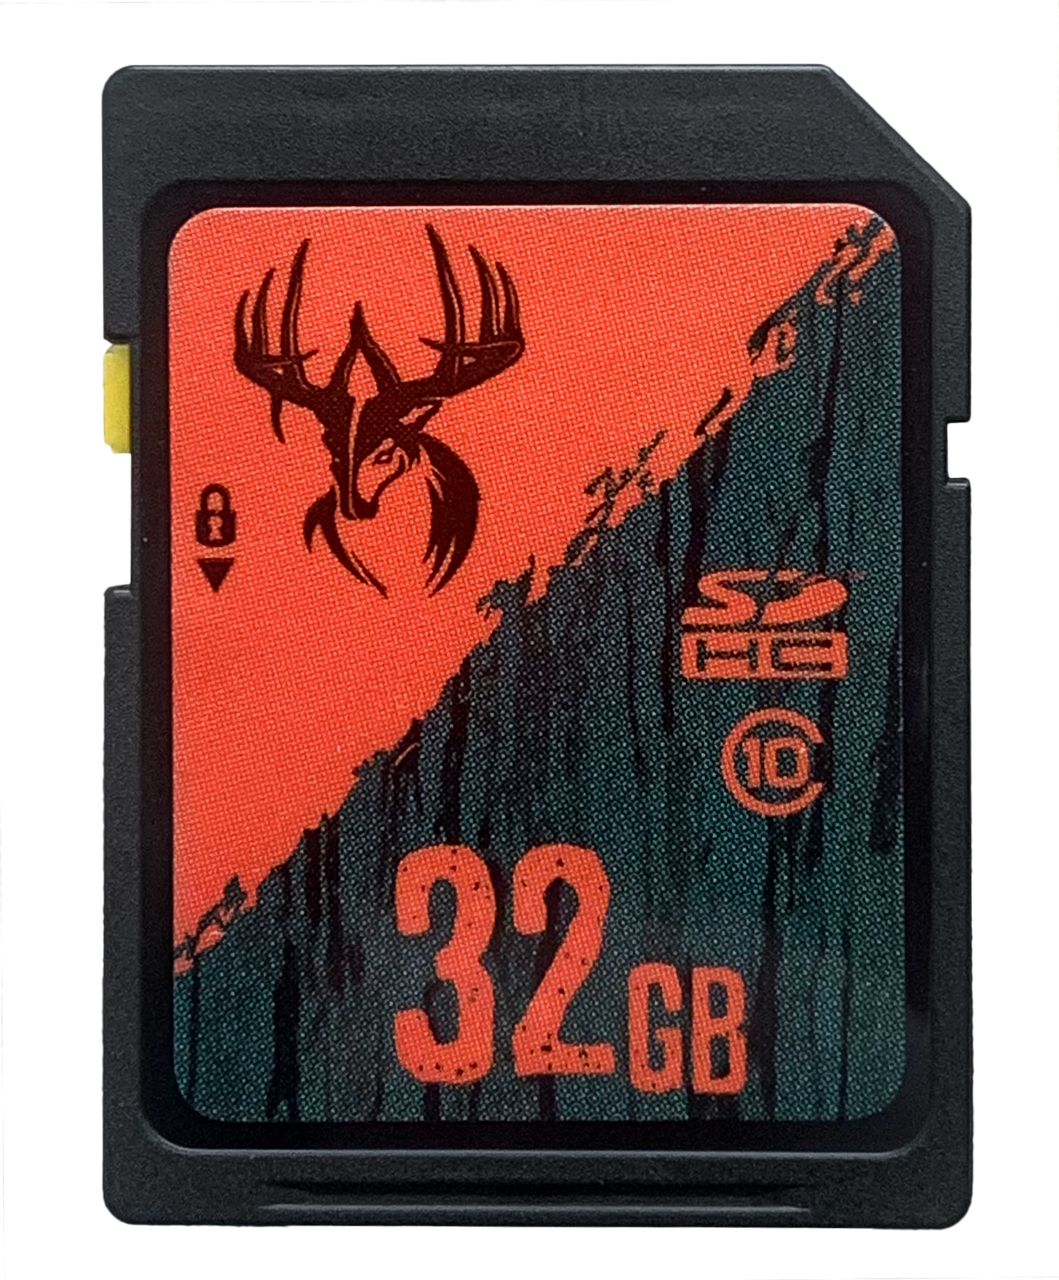 https://www.wildgameinnovations.com/wp-content/uploads/2022/03/32GB__93165.1701200245.1280.1280.png